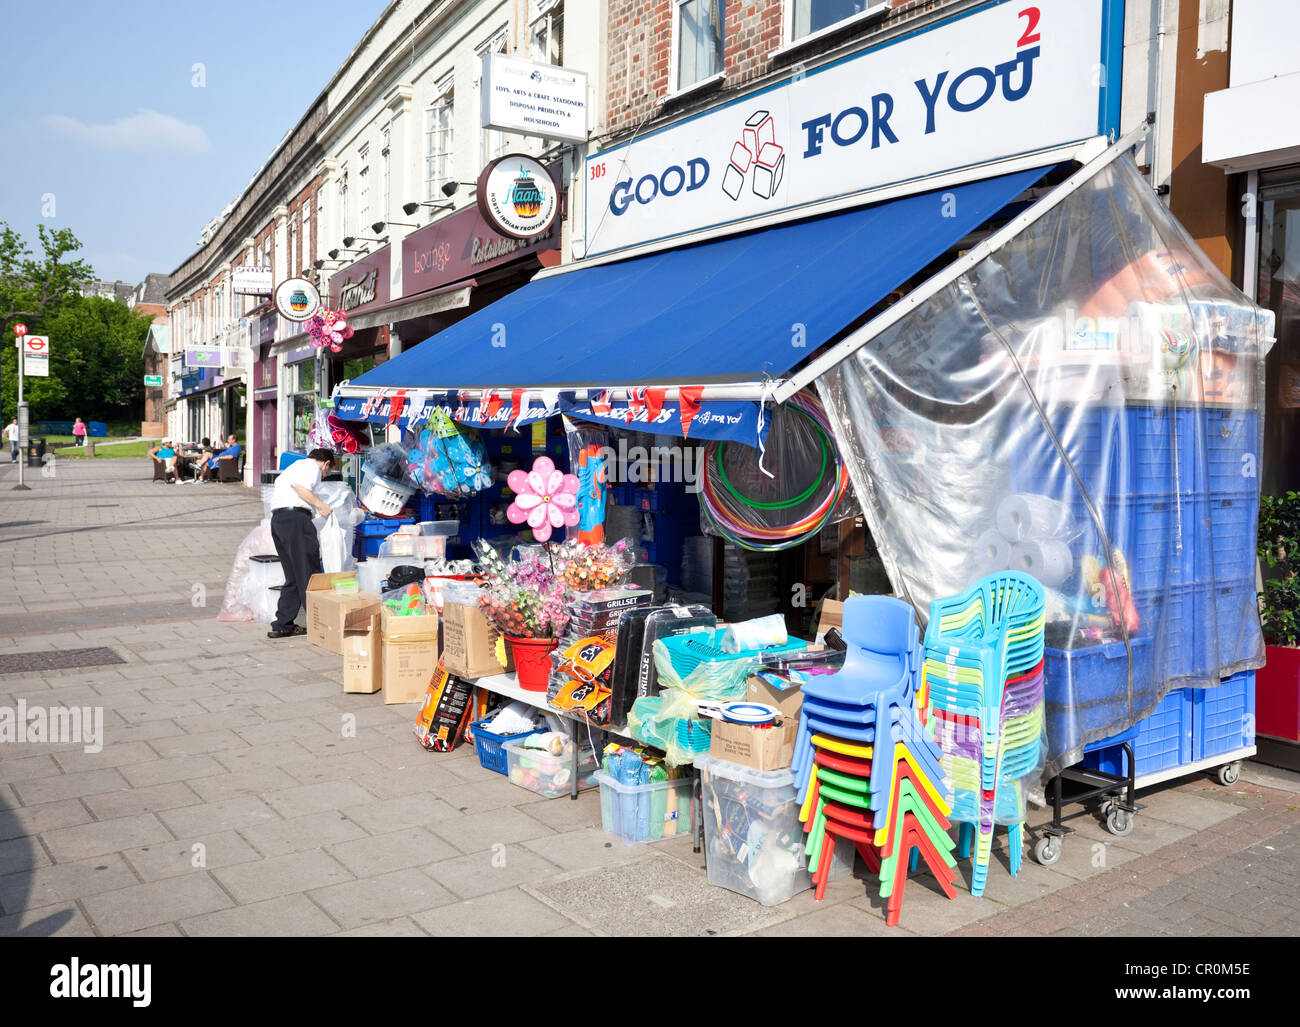 Street shop displaying houseware items on the pavement, Edgware, Middlesex, England, UK Stock Photo